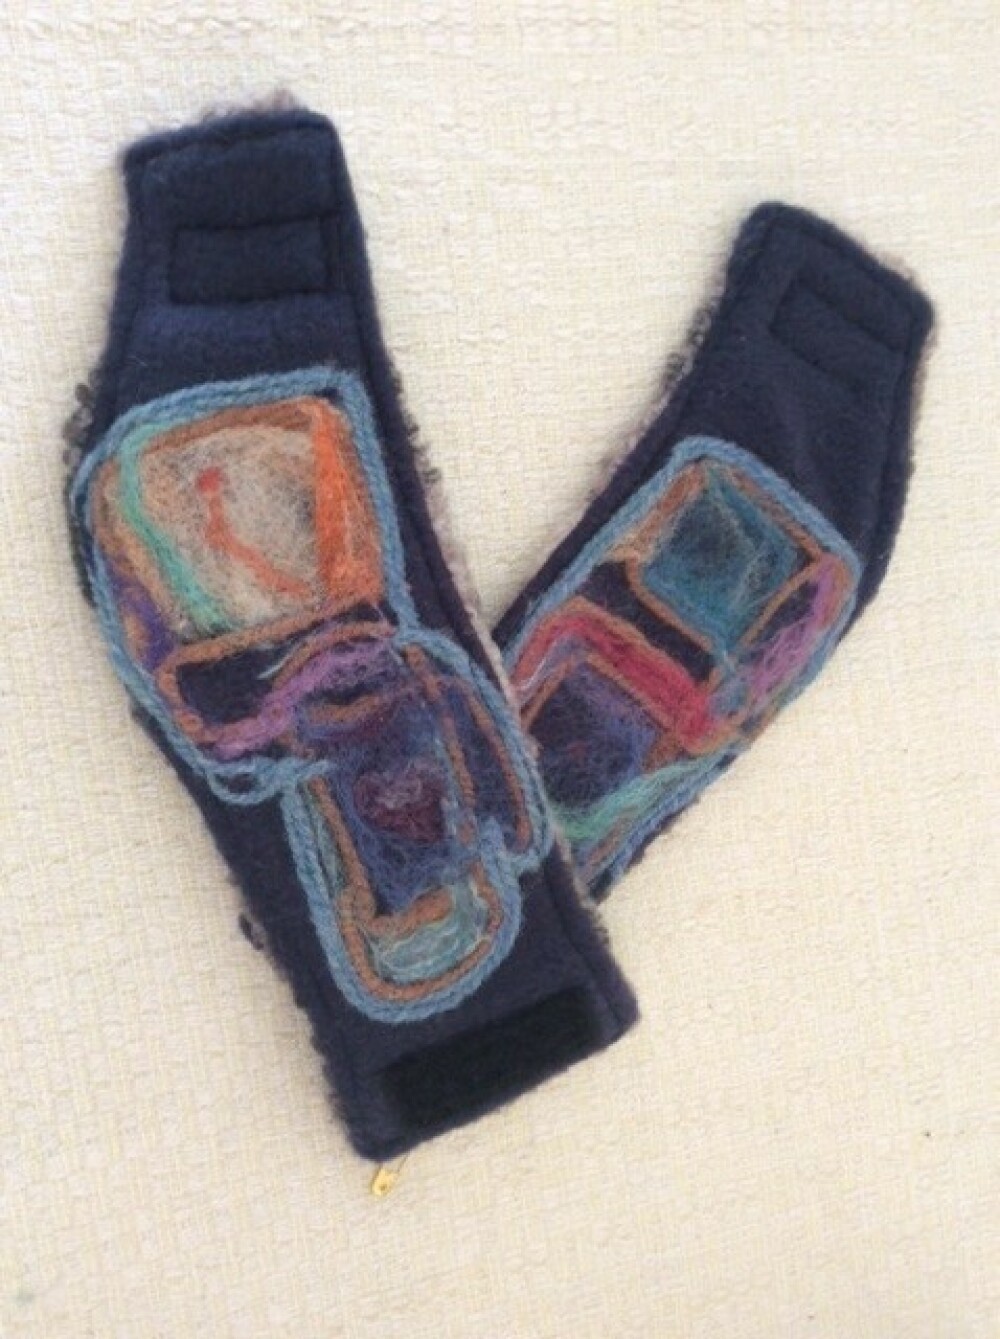 Fleece Wrist Warmer, with felted wool accents